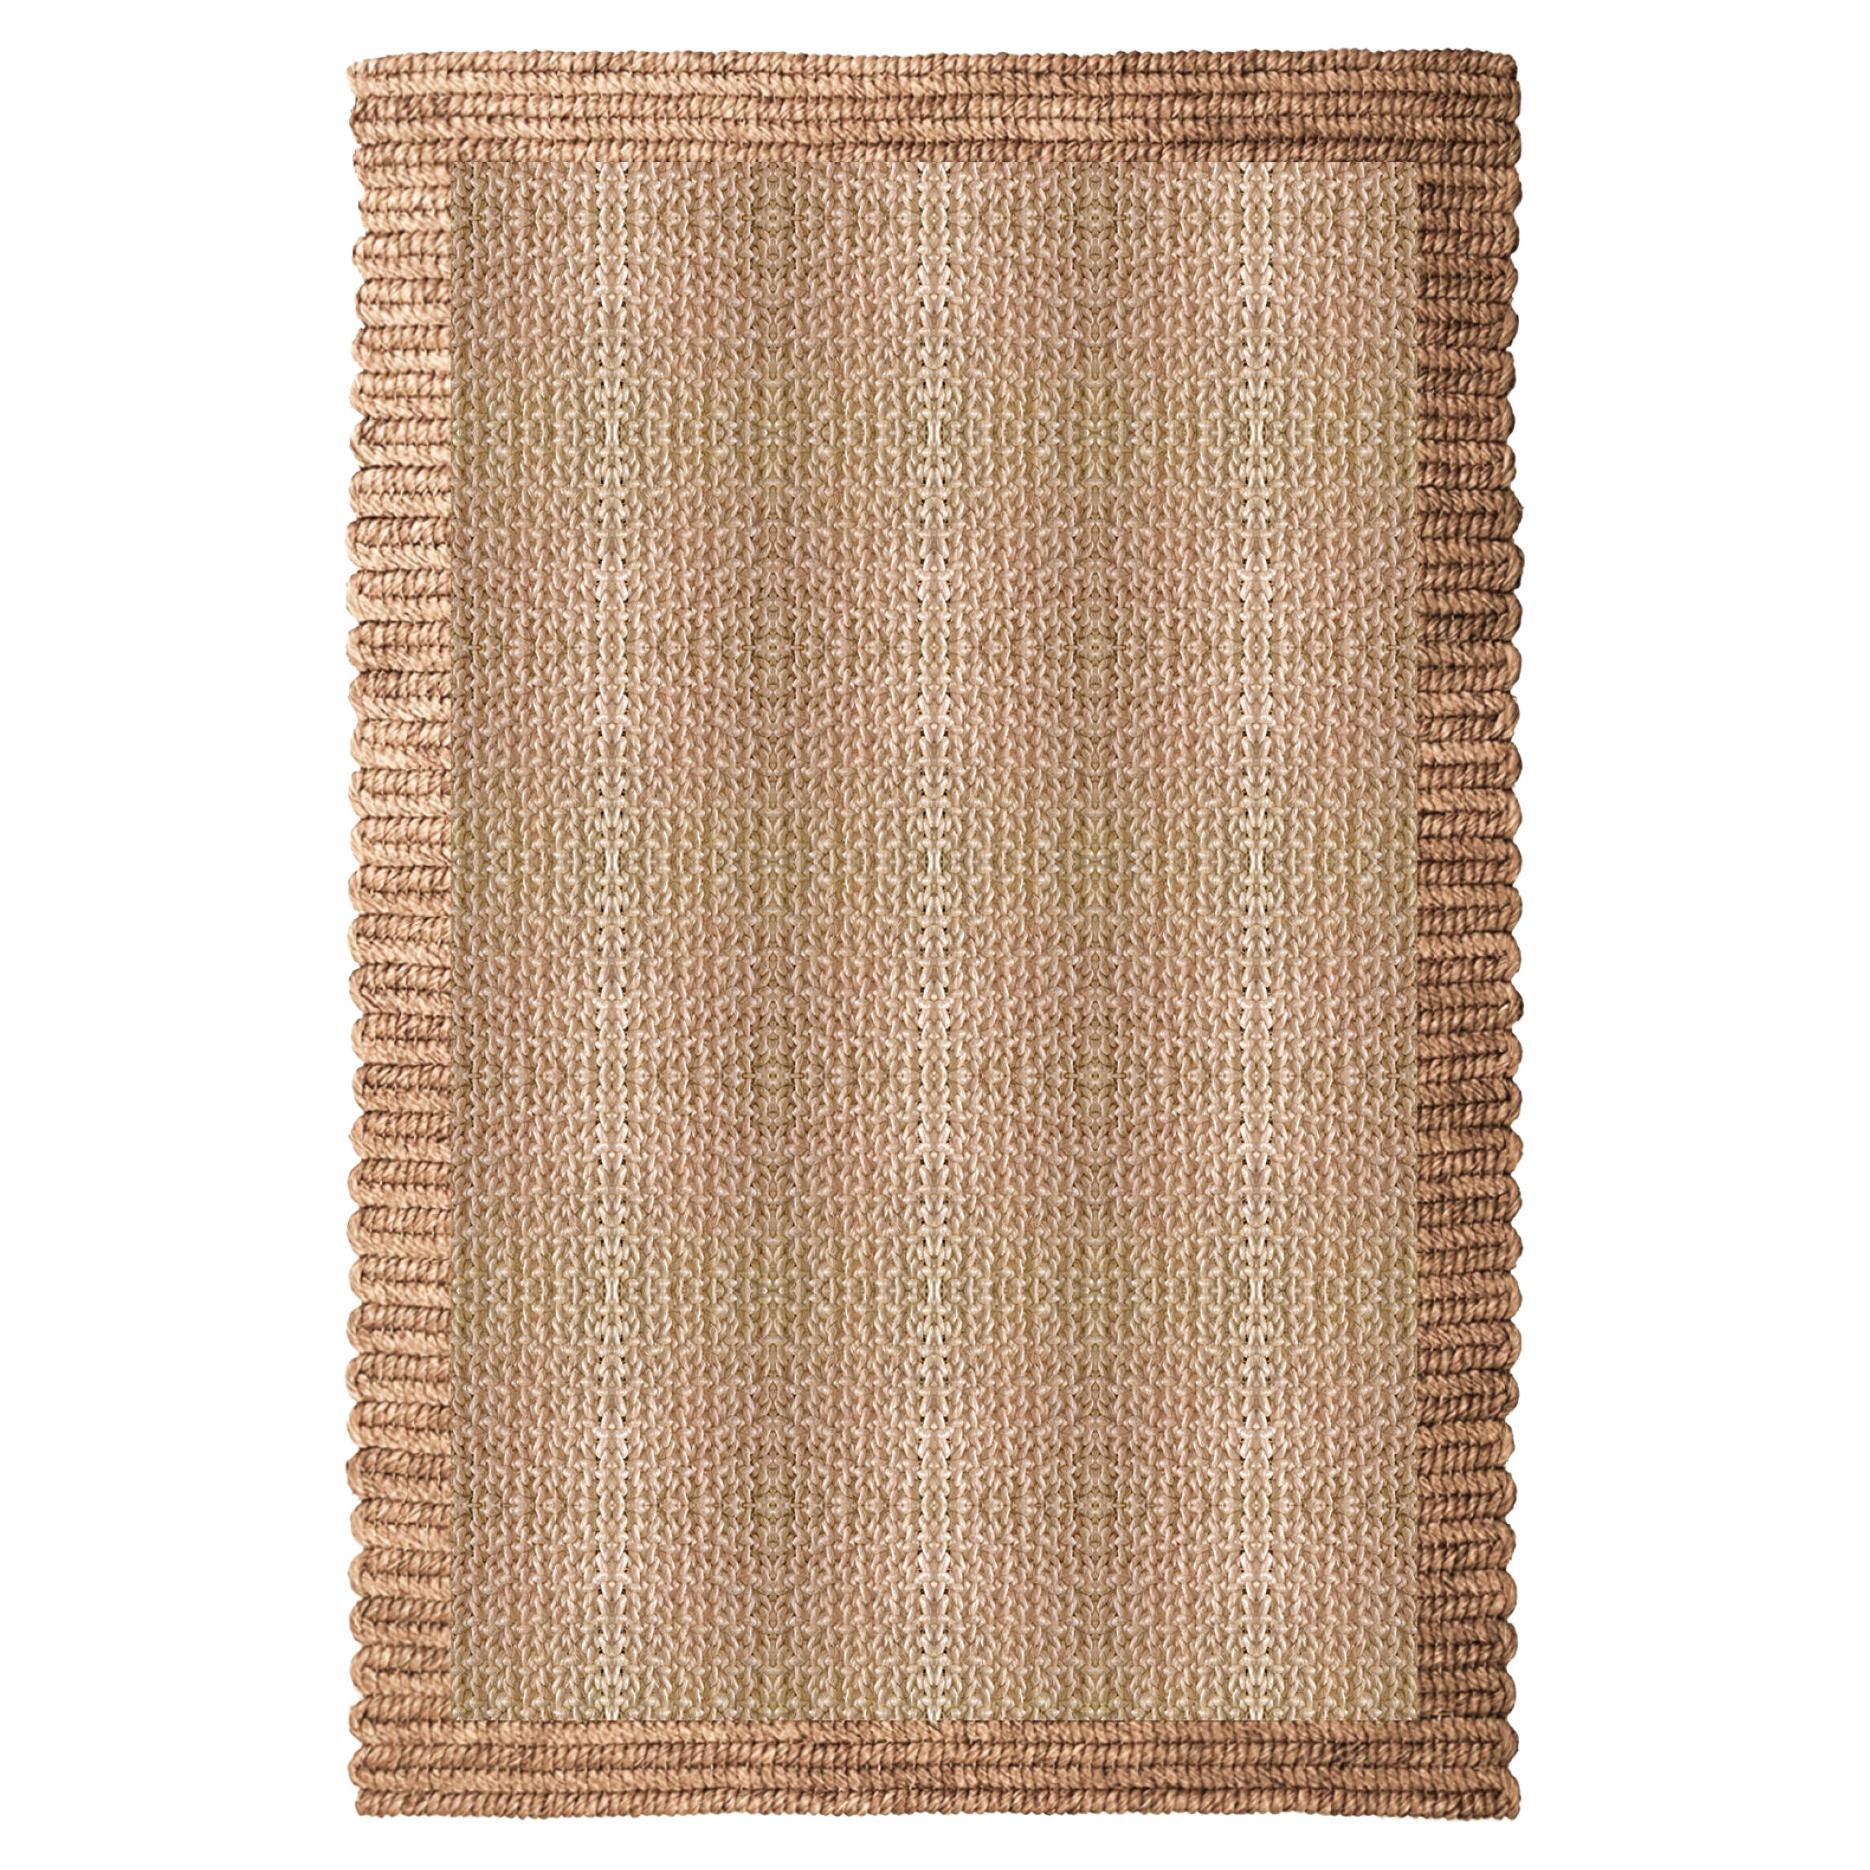 'NAP Uni' Rug in Abaca by Claire Vos for Musett Design